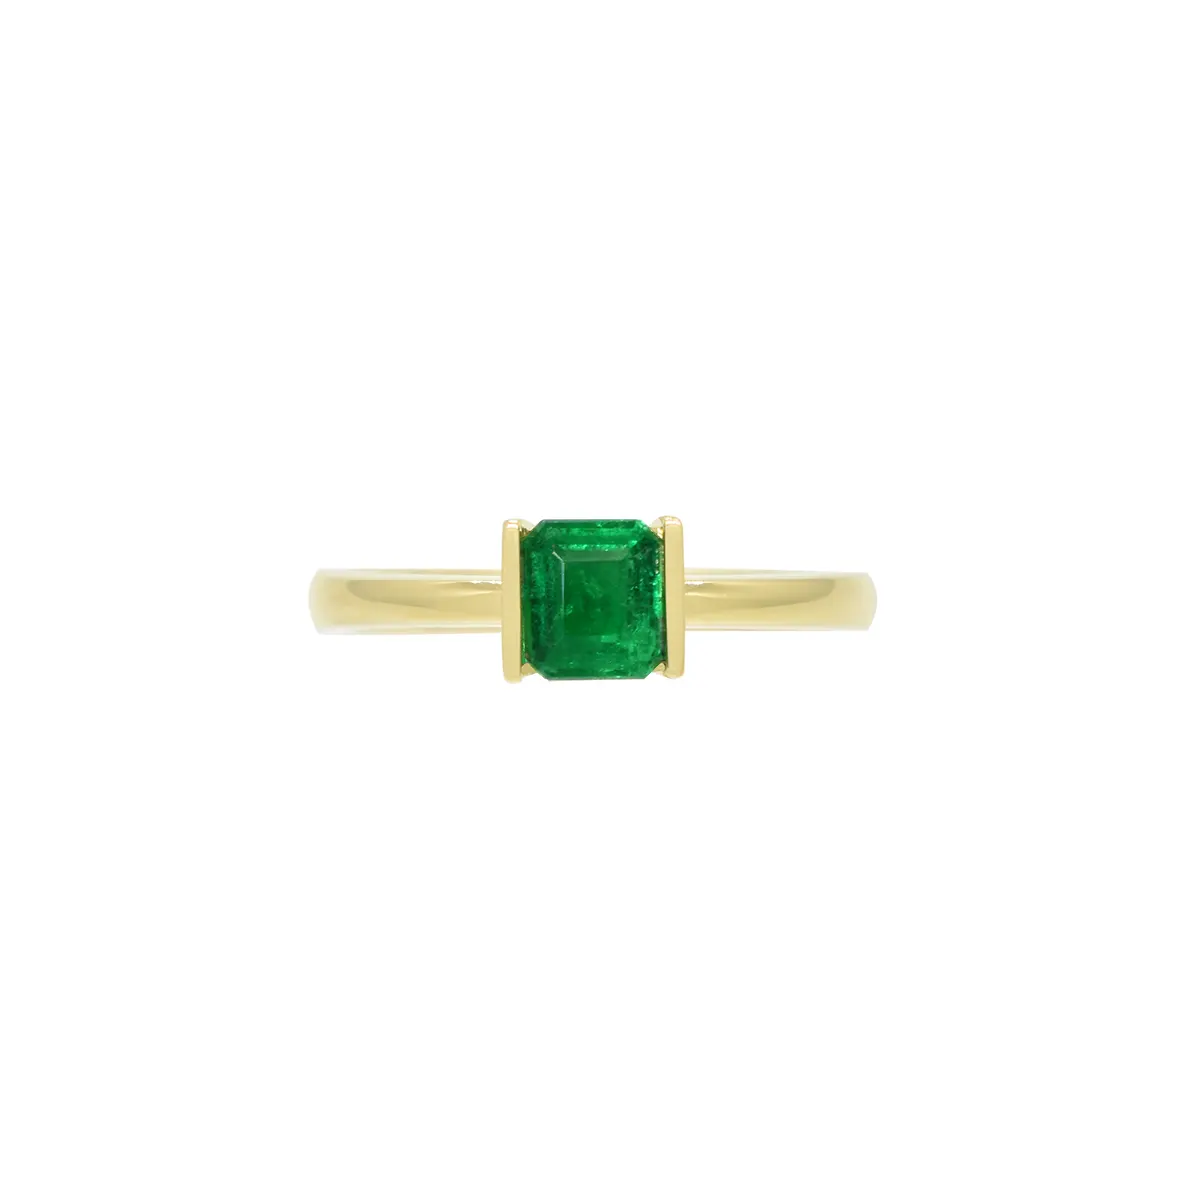 The centerpiece of this single-stone ring is a half-a-carat square-shaped emerald cut Natural emerald with dark and vivid green color, which exudes a rich and captivating allure